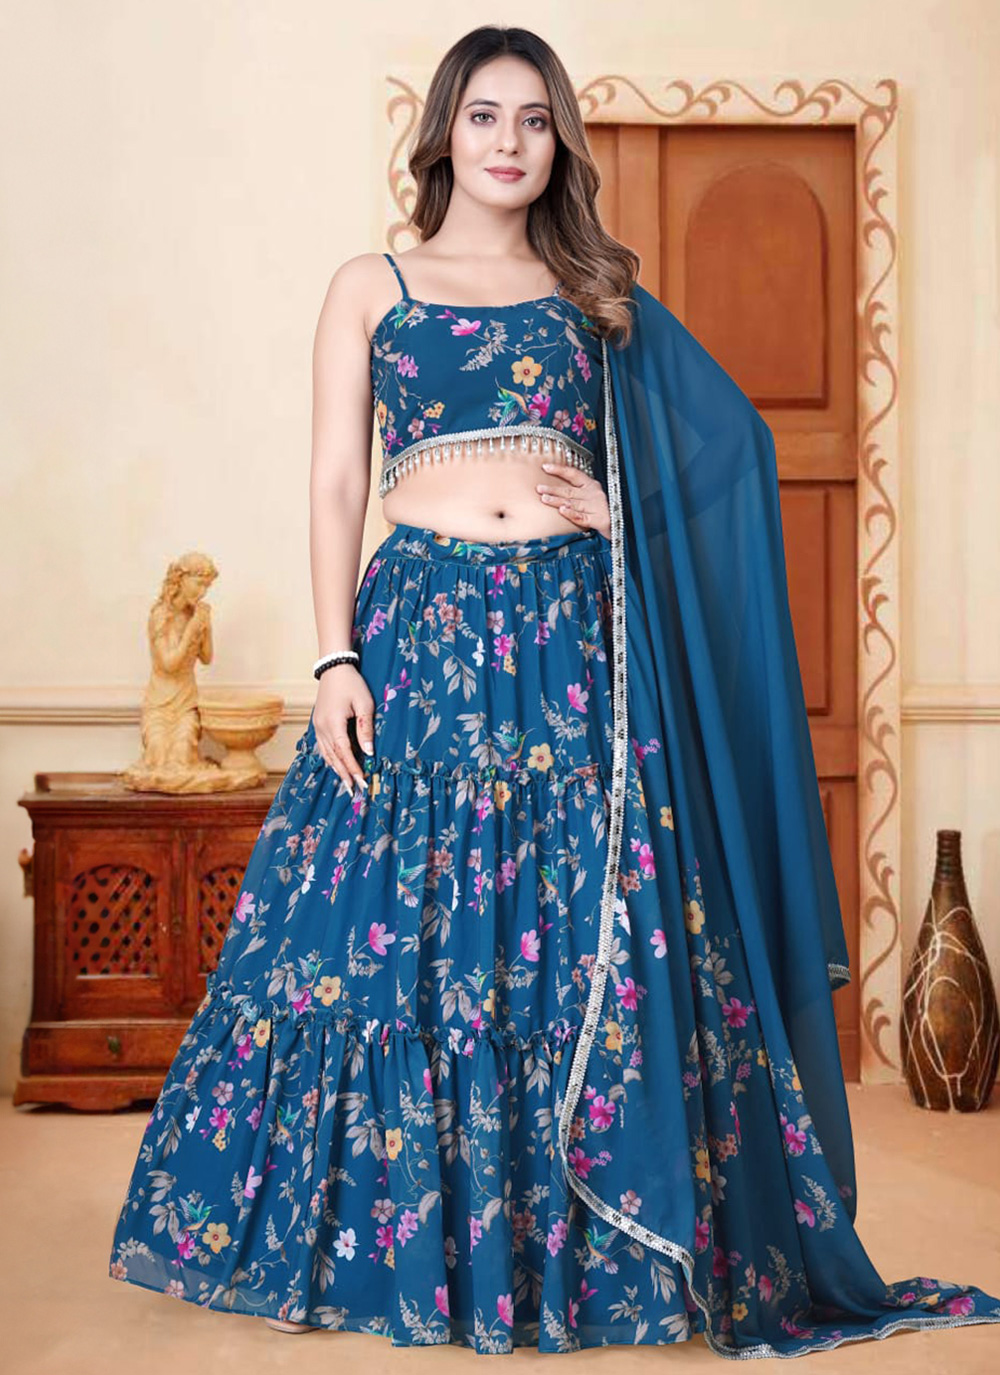 R N Enterprise Embroidered Semi Stitched Lehenga Choli - Buy R N Enterprise  Embroidered Semi Stitched Lehenga Choli Online at Best Prices in India |  Flipkart.com